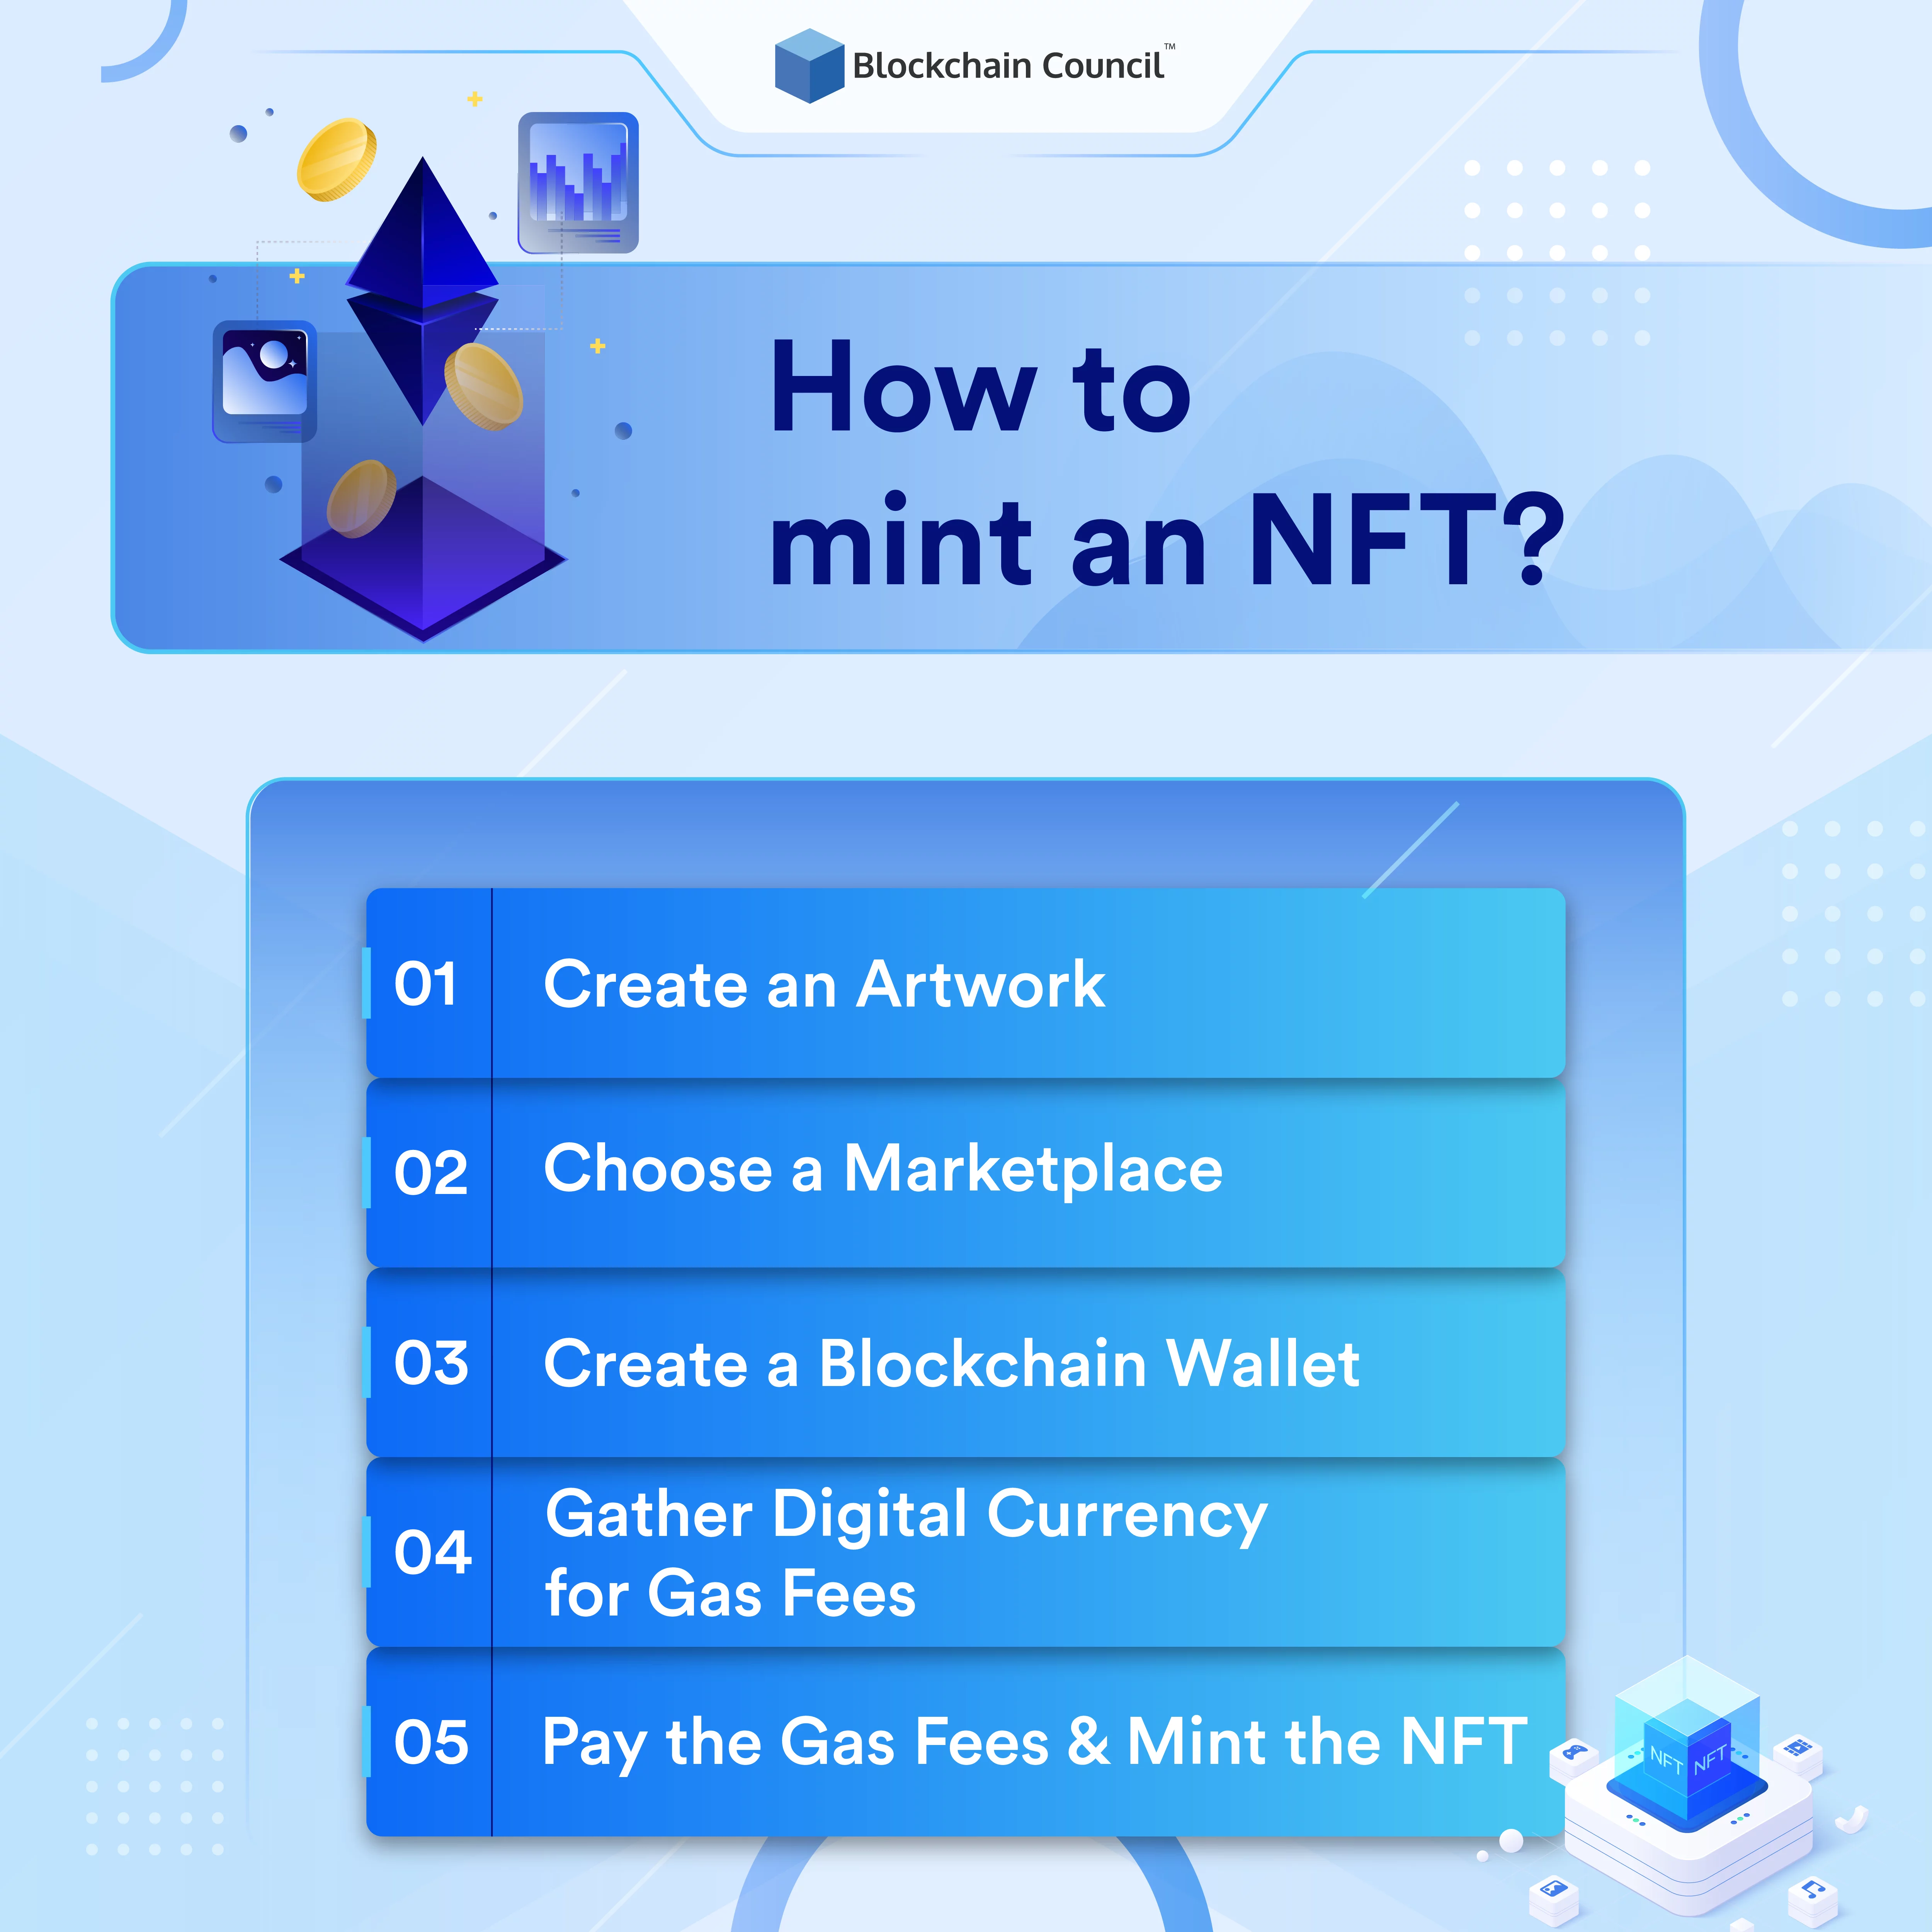 How To Mint an NFT Guide Blockchain Council